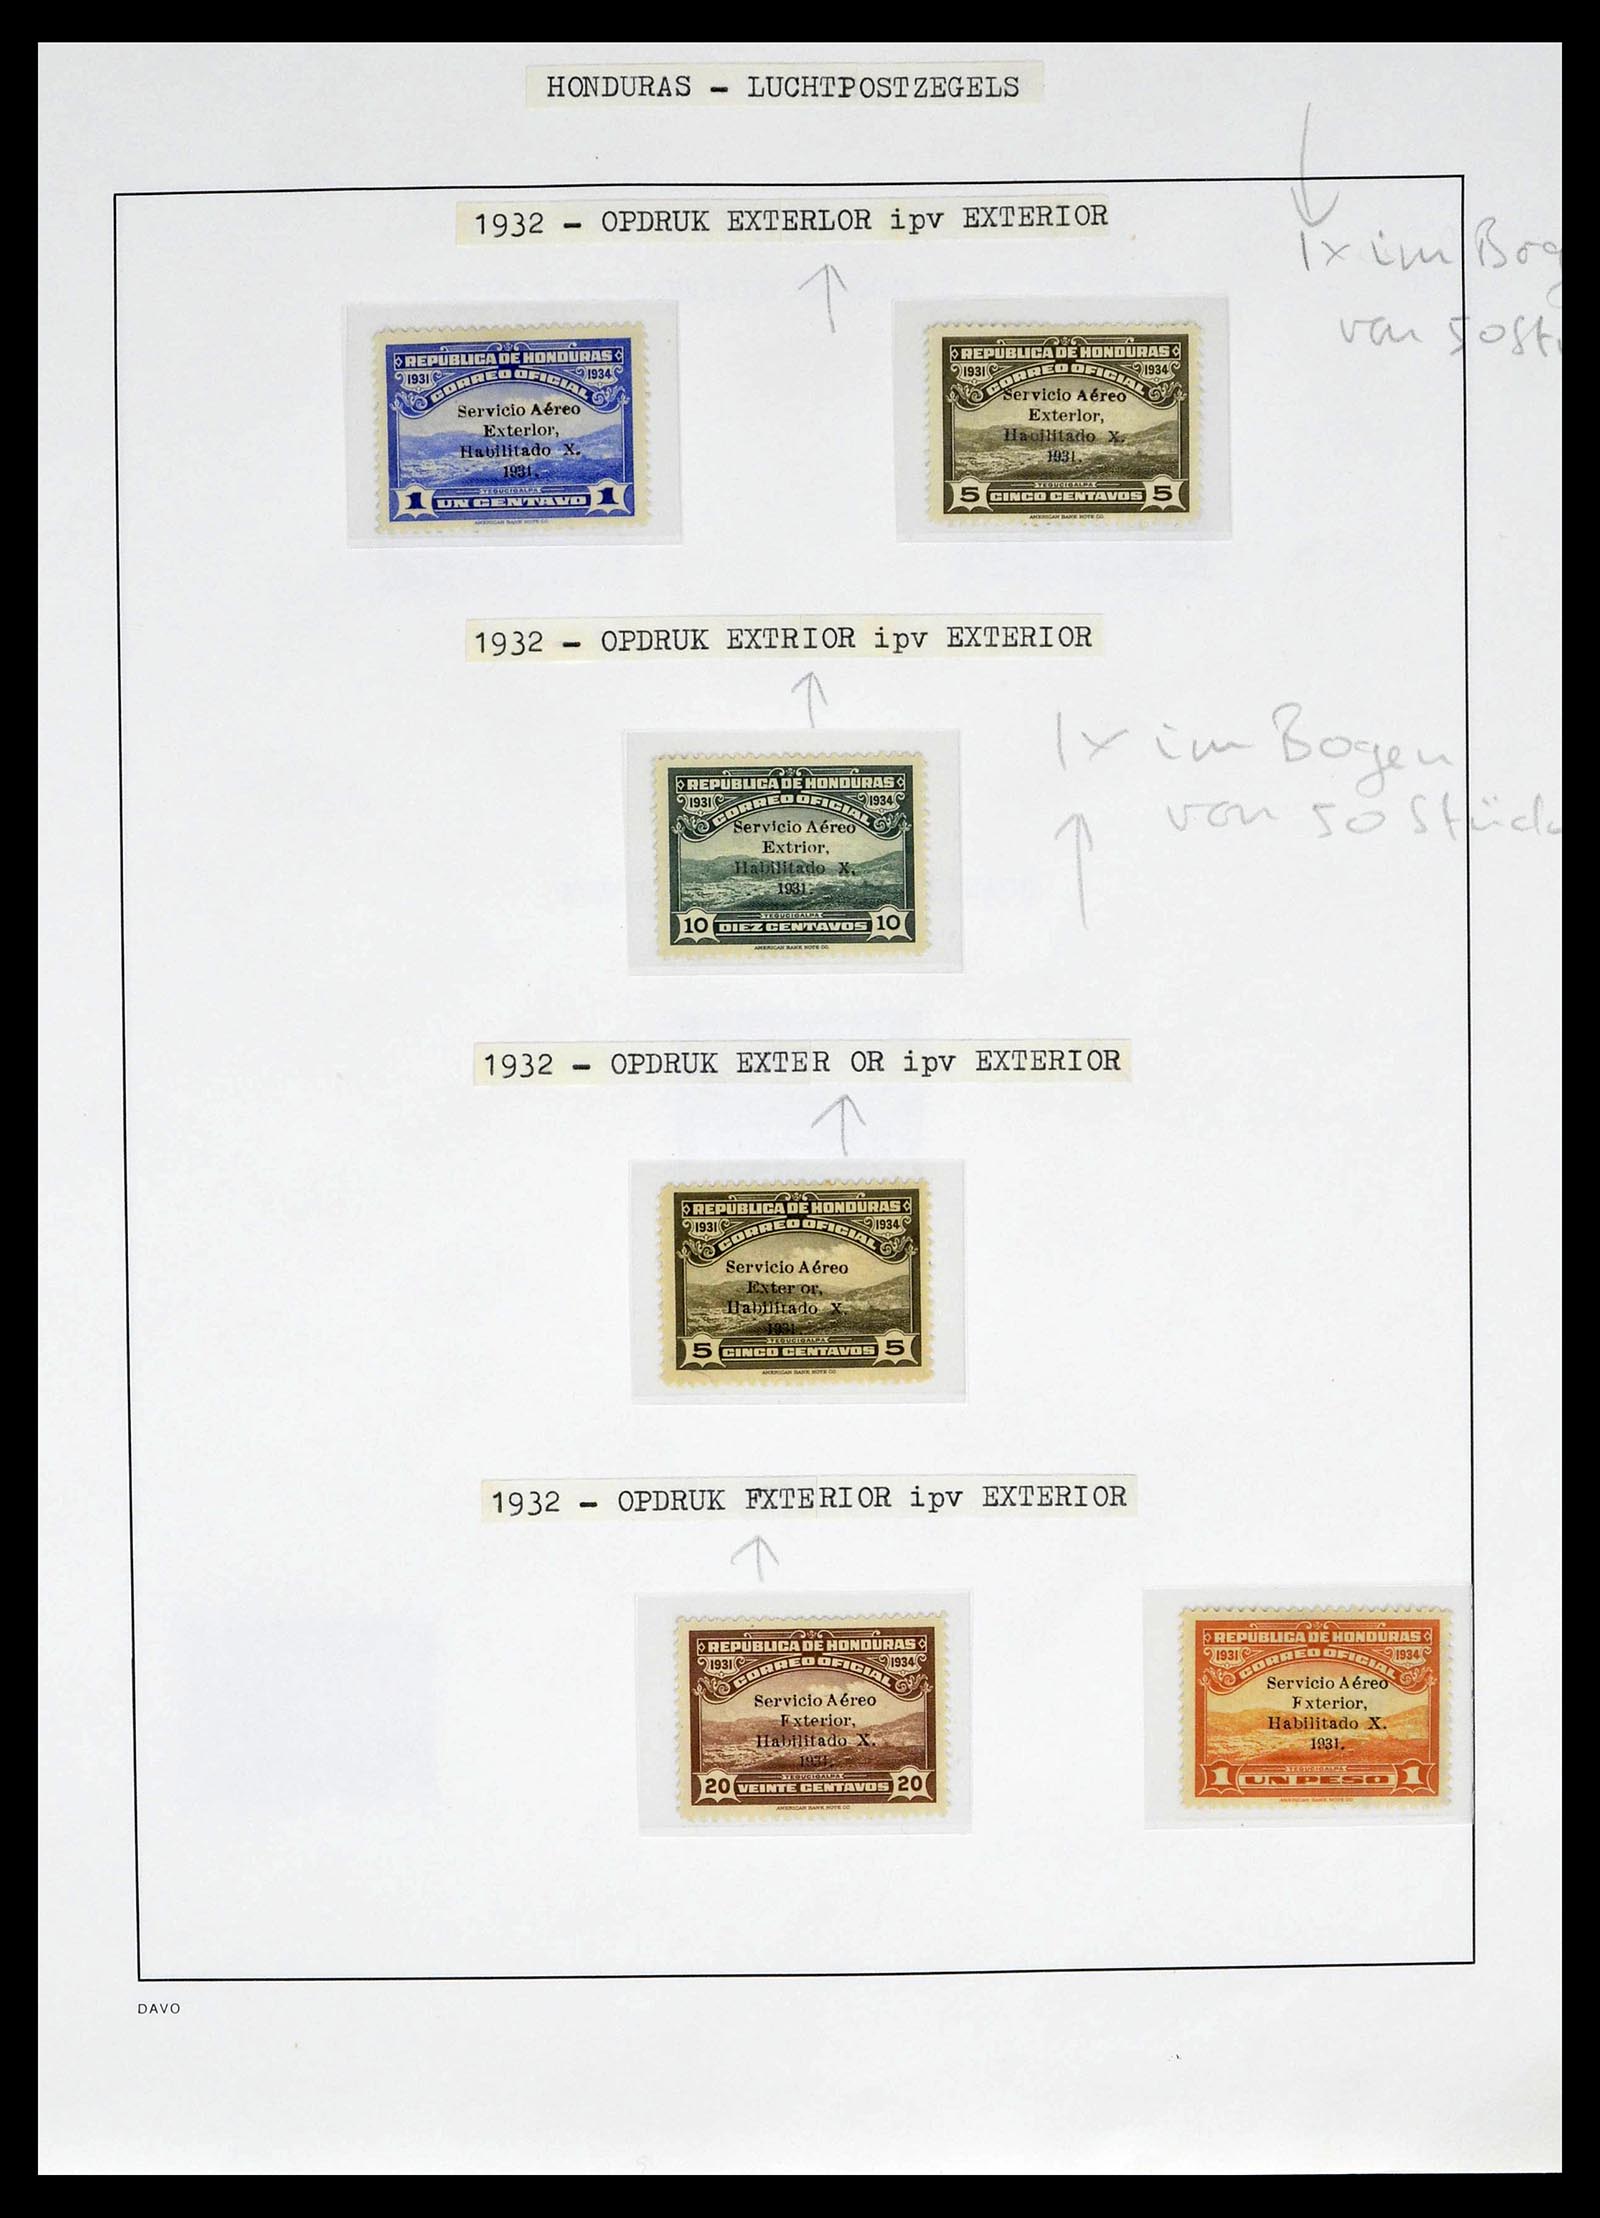 39410 0037 - Stamp collection 39410 Honduras topcollection airmail 1925-1984.